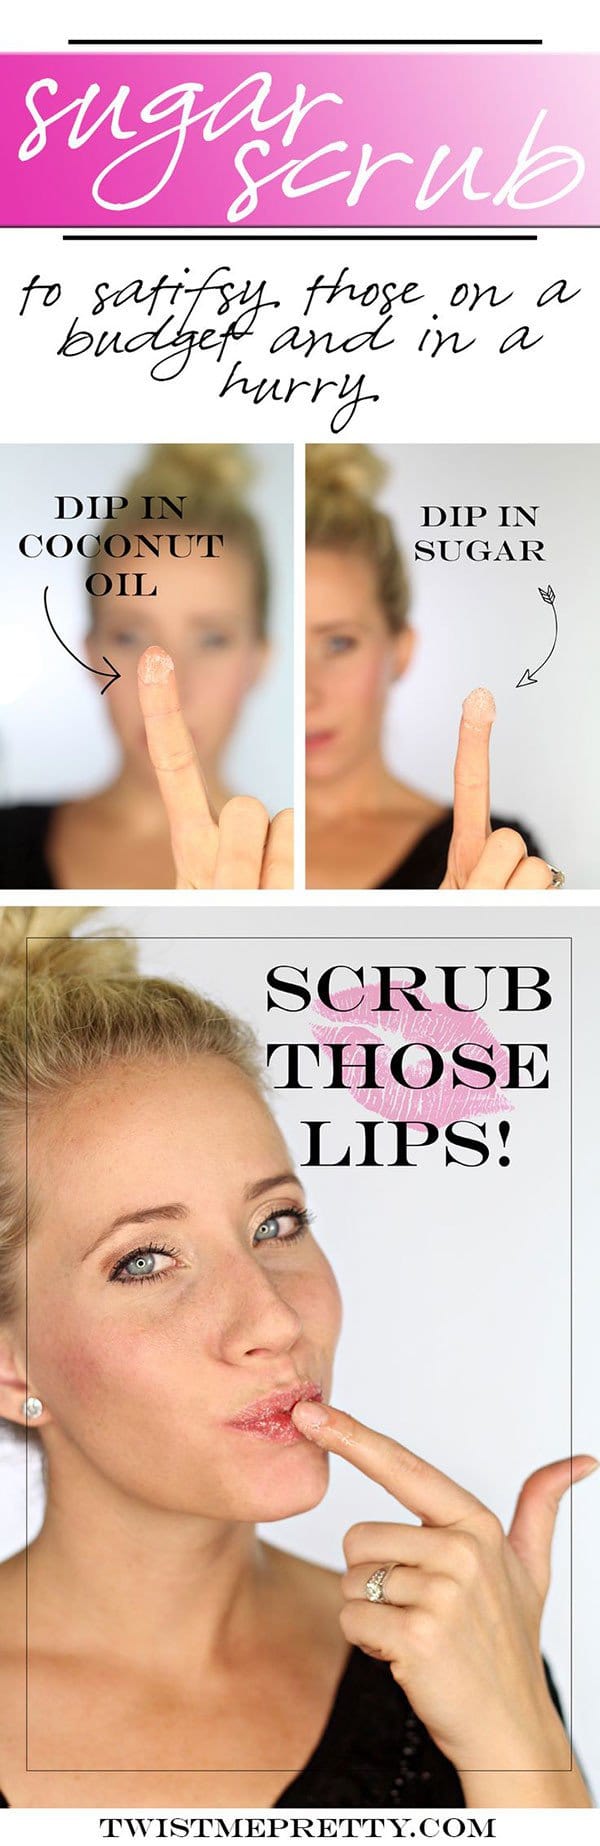 7 Simple But Super Useful Makeup Tips That Will Make Your Beauty Routine Easier